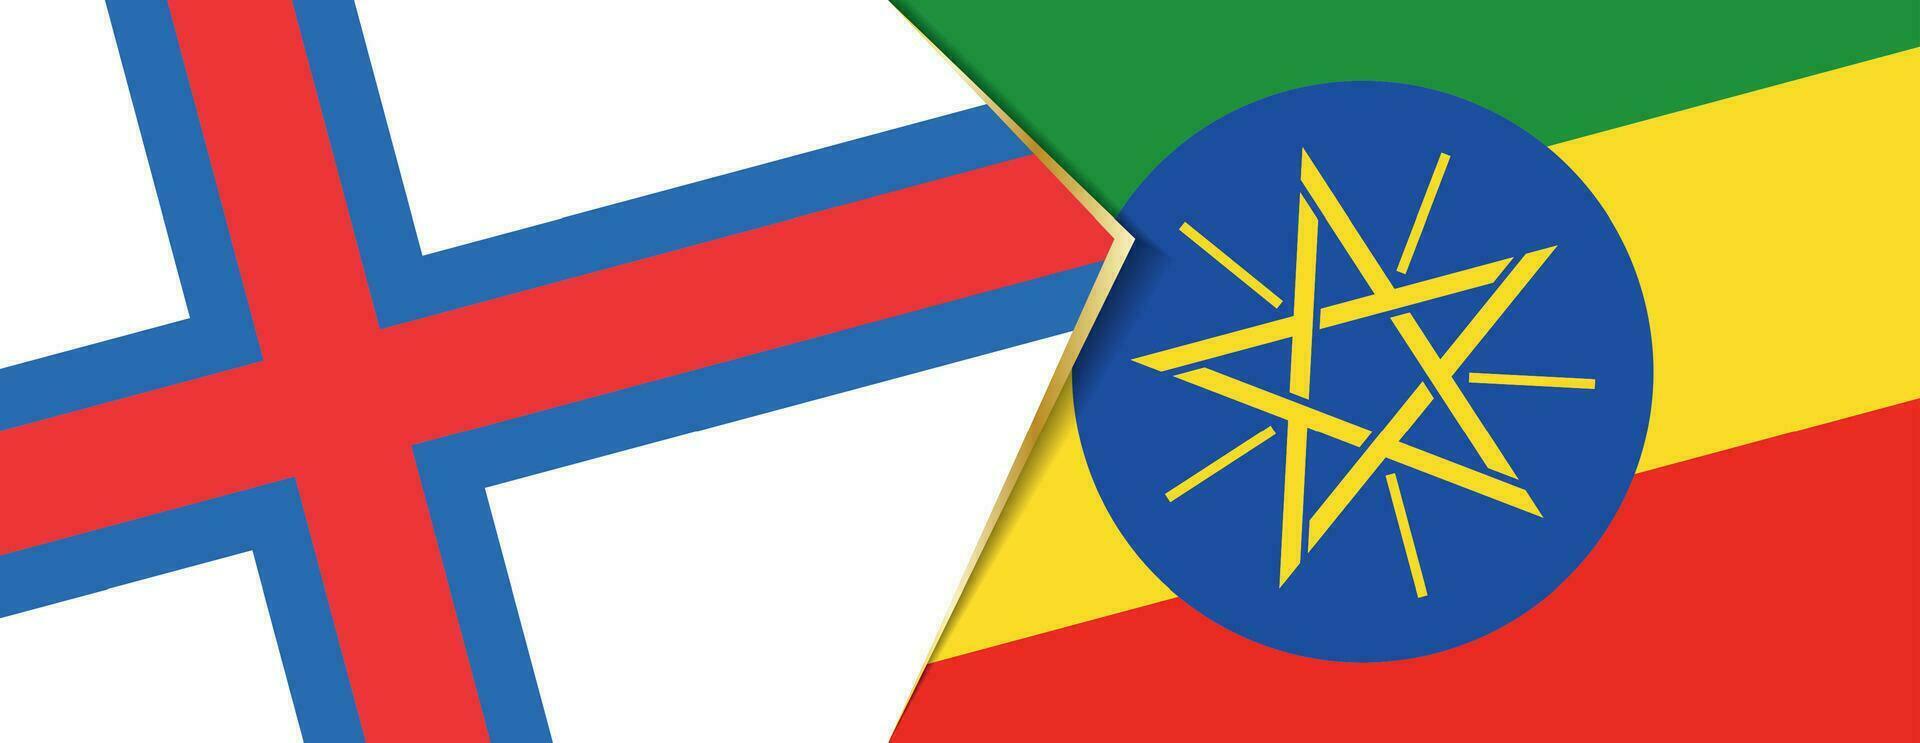 Faroe Islands and Ethiopia flags, two vector flags.